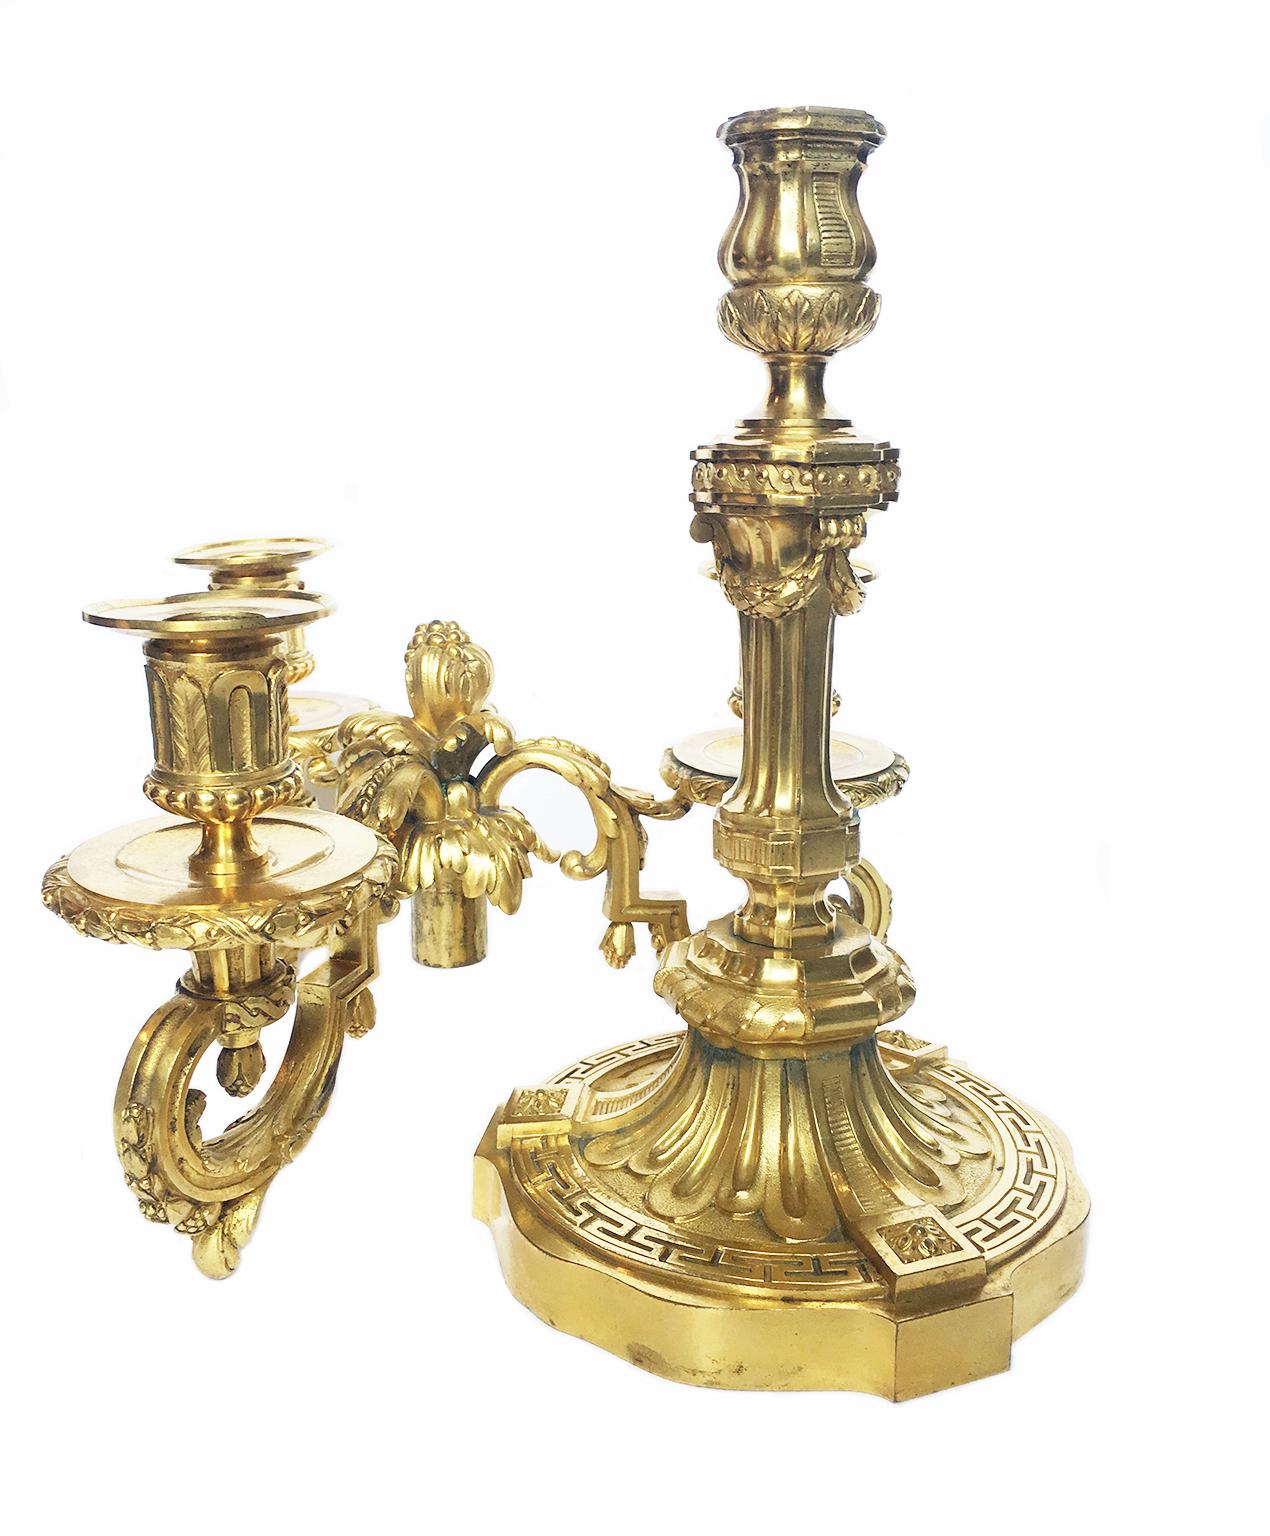 Pair of French Three-Flame Candelabra Candelabra, circa 1860 For Sale 5